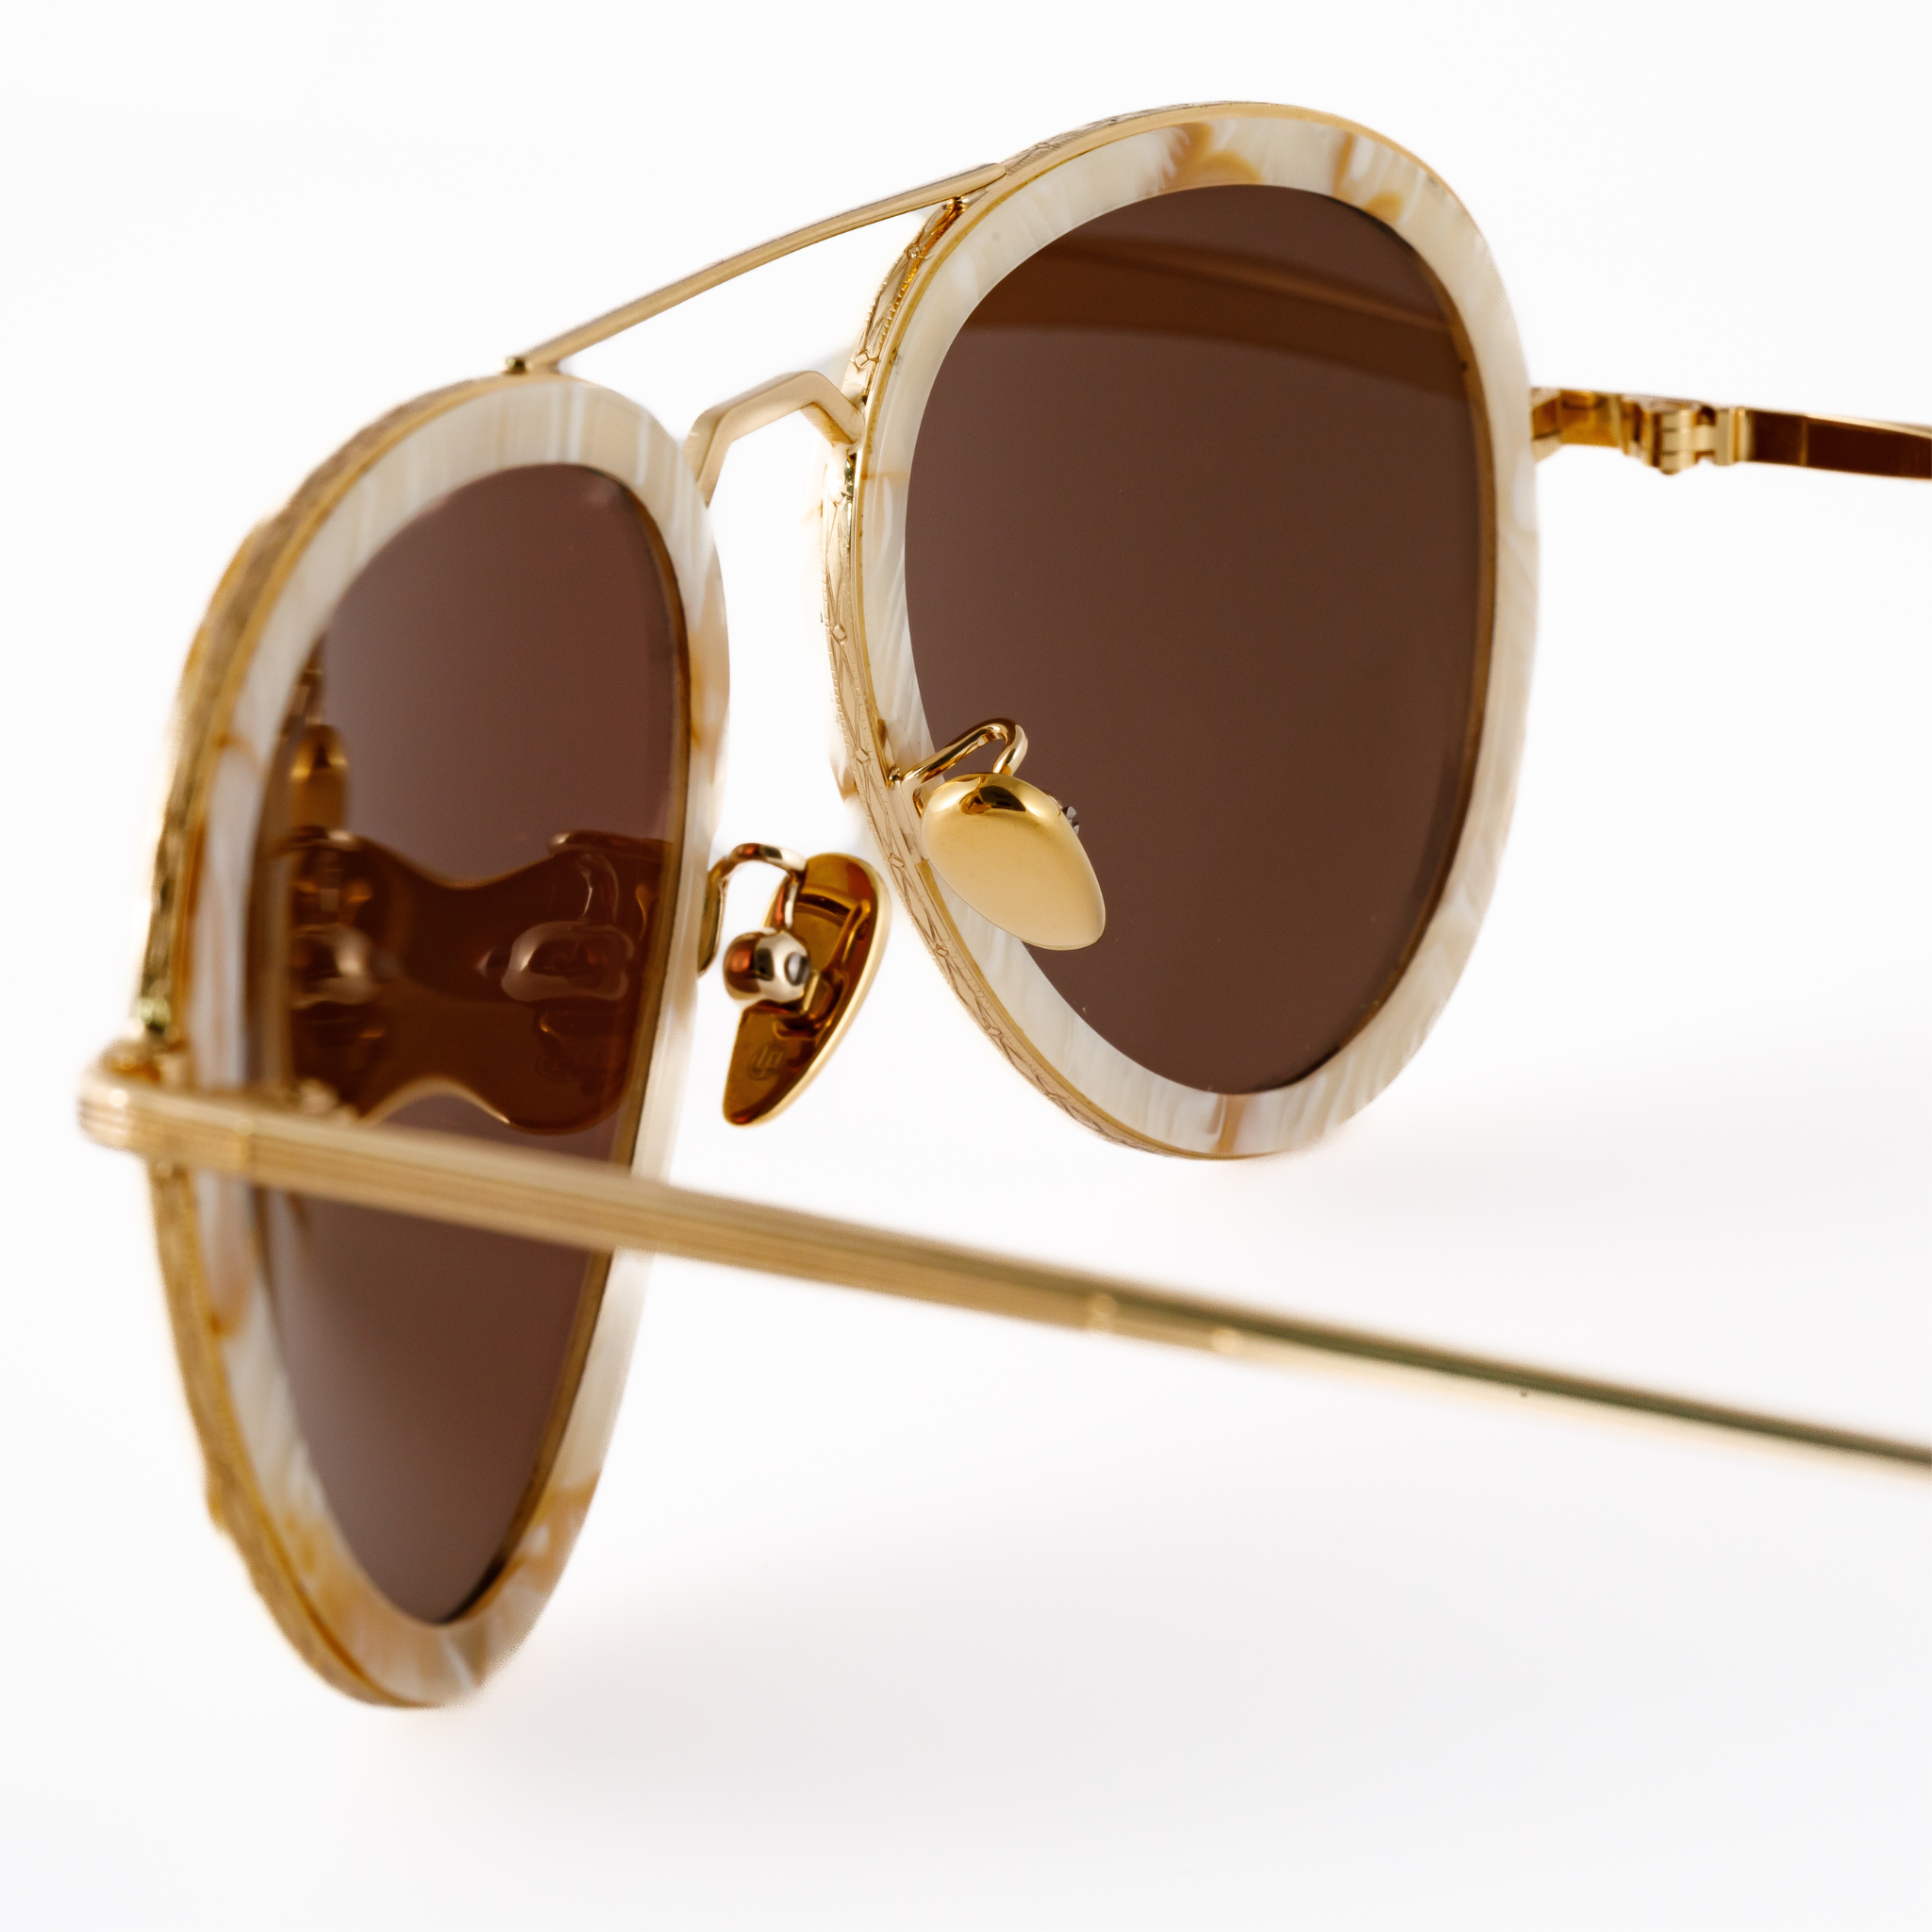 Mens Aviator sunglasses for small faces gold  internal view showcases gold adjustable ceramic nose pads and durable gold hinges